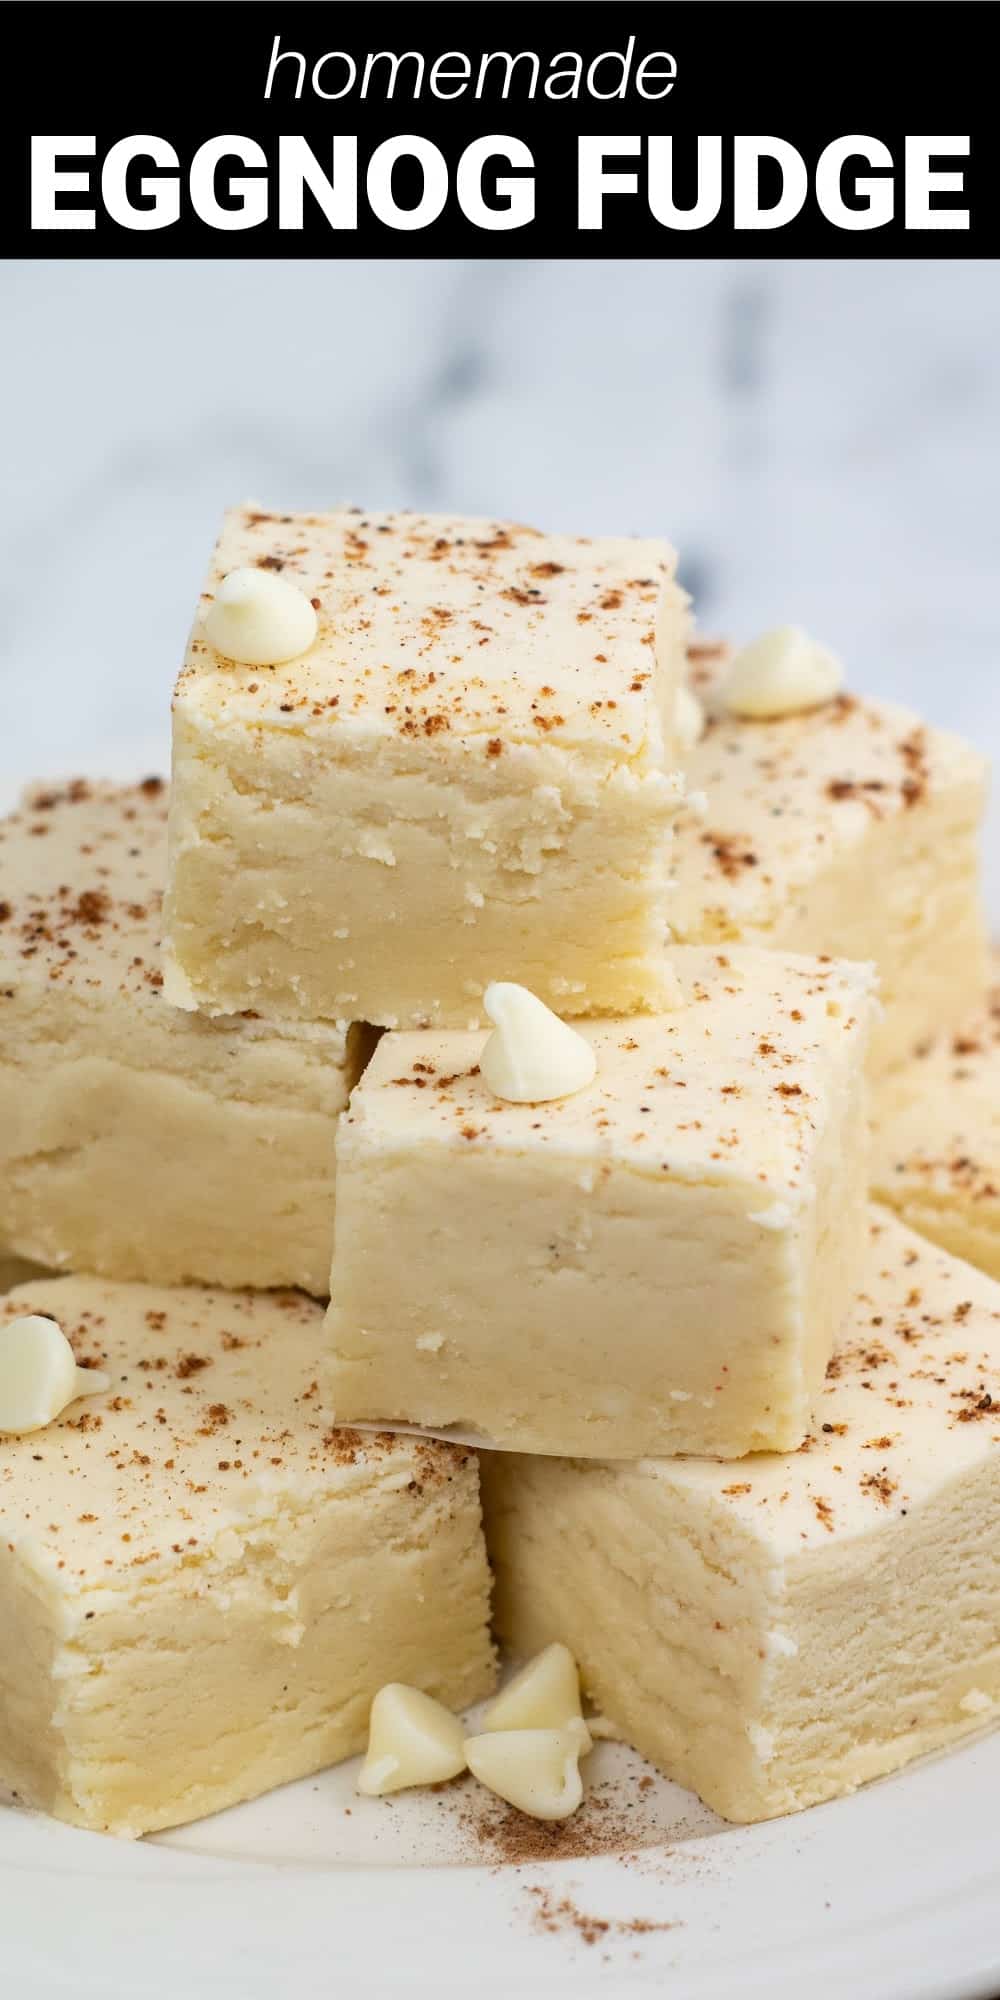 This homemade dreamy Eggnog Fudge Recipe is everything you’re looking for in a sweet holiday indulgence. Creamy white chocolate infused with authentic eggnog flavor makes a decadent melt-in-your mouth sweet treat that your friends and family will love!